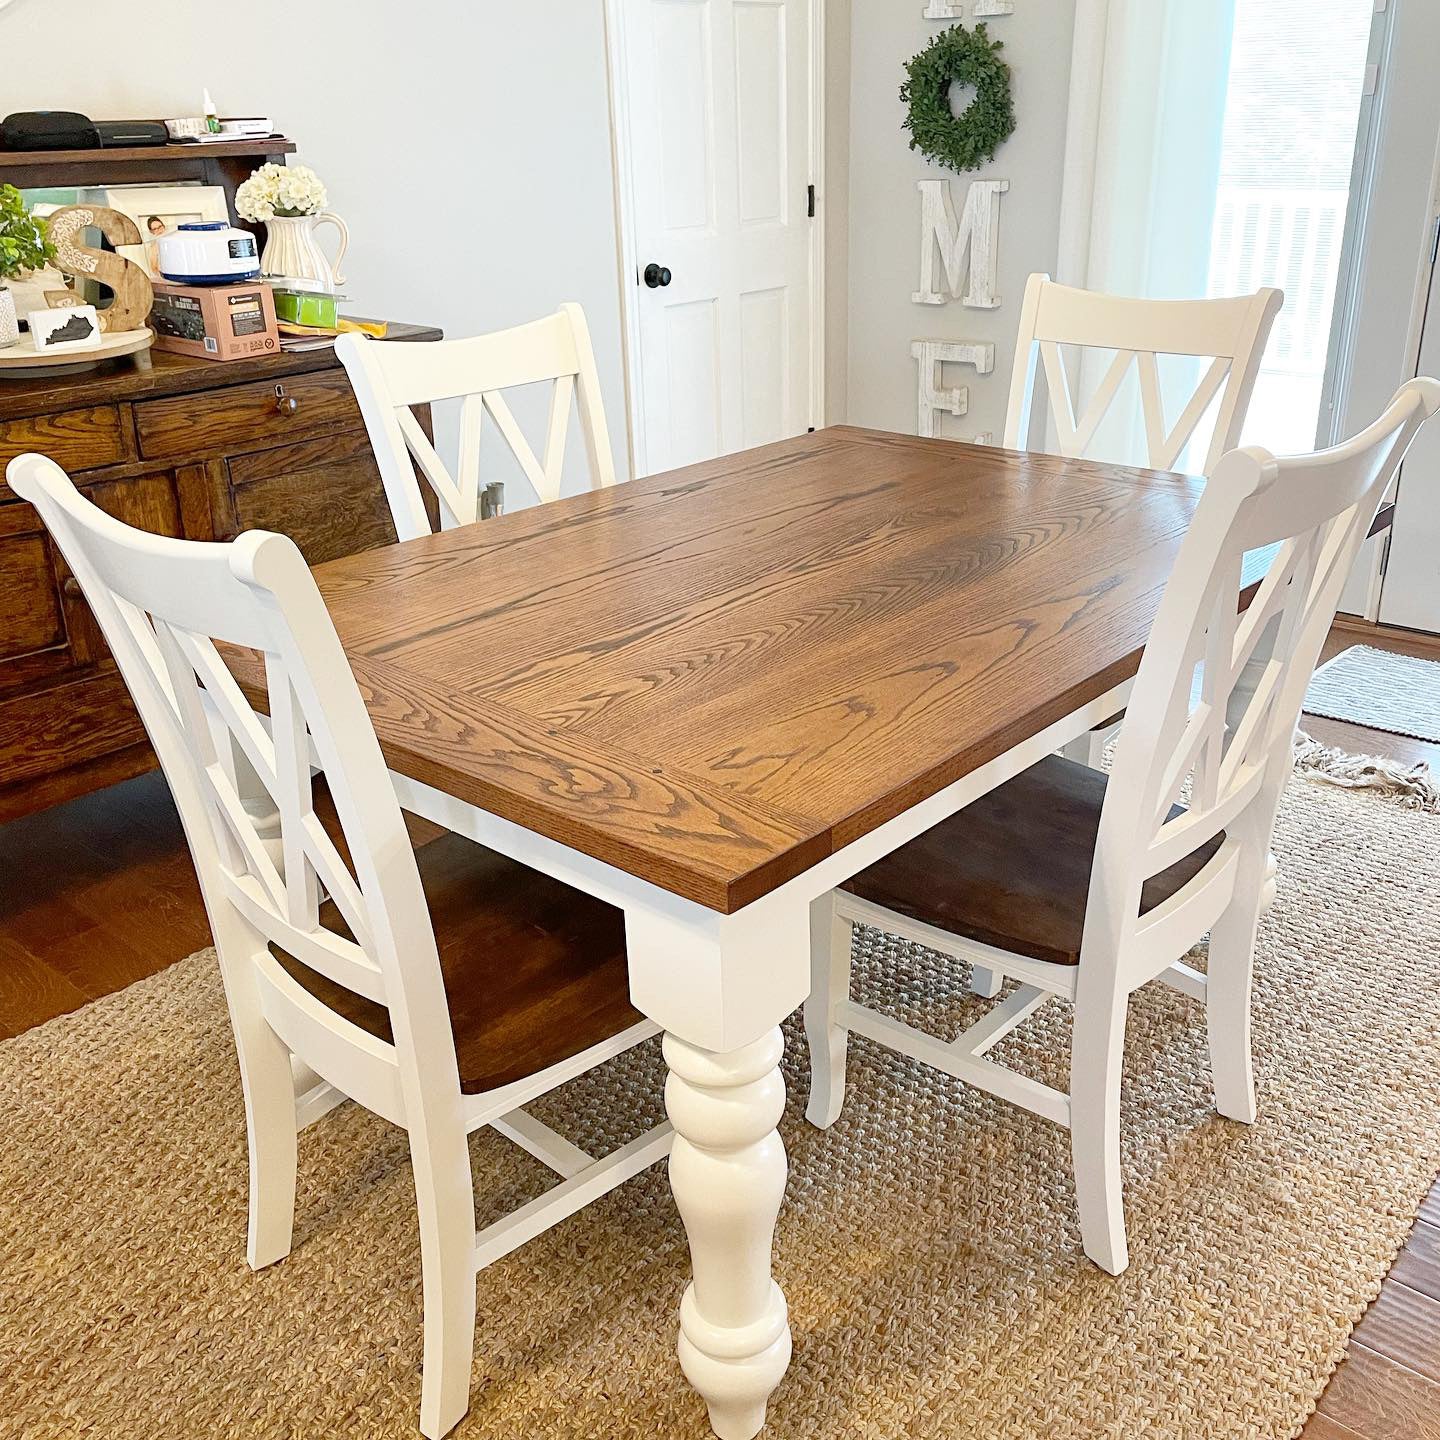 Pictured with a 5' L x 42" W Red Oak top with a Bread Board stained Honey with a White painted base. Pictured with 4 Double Cross Back Chairs.